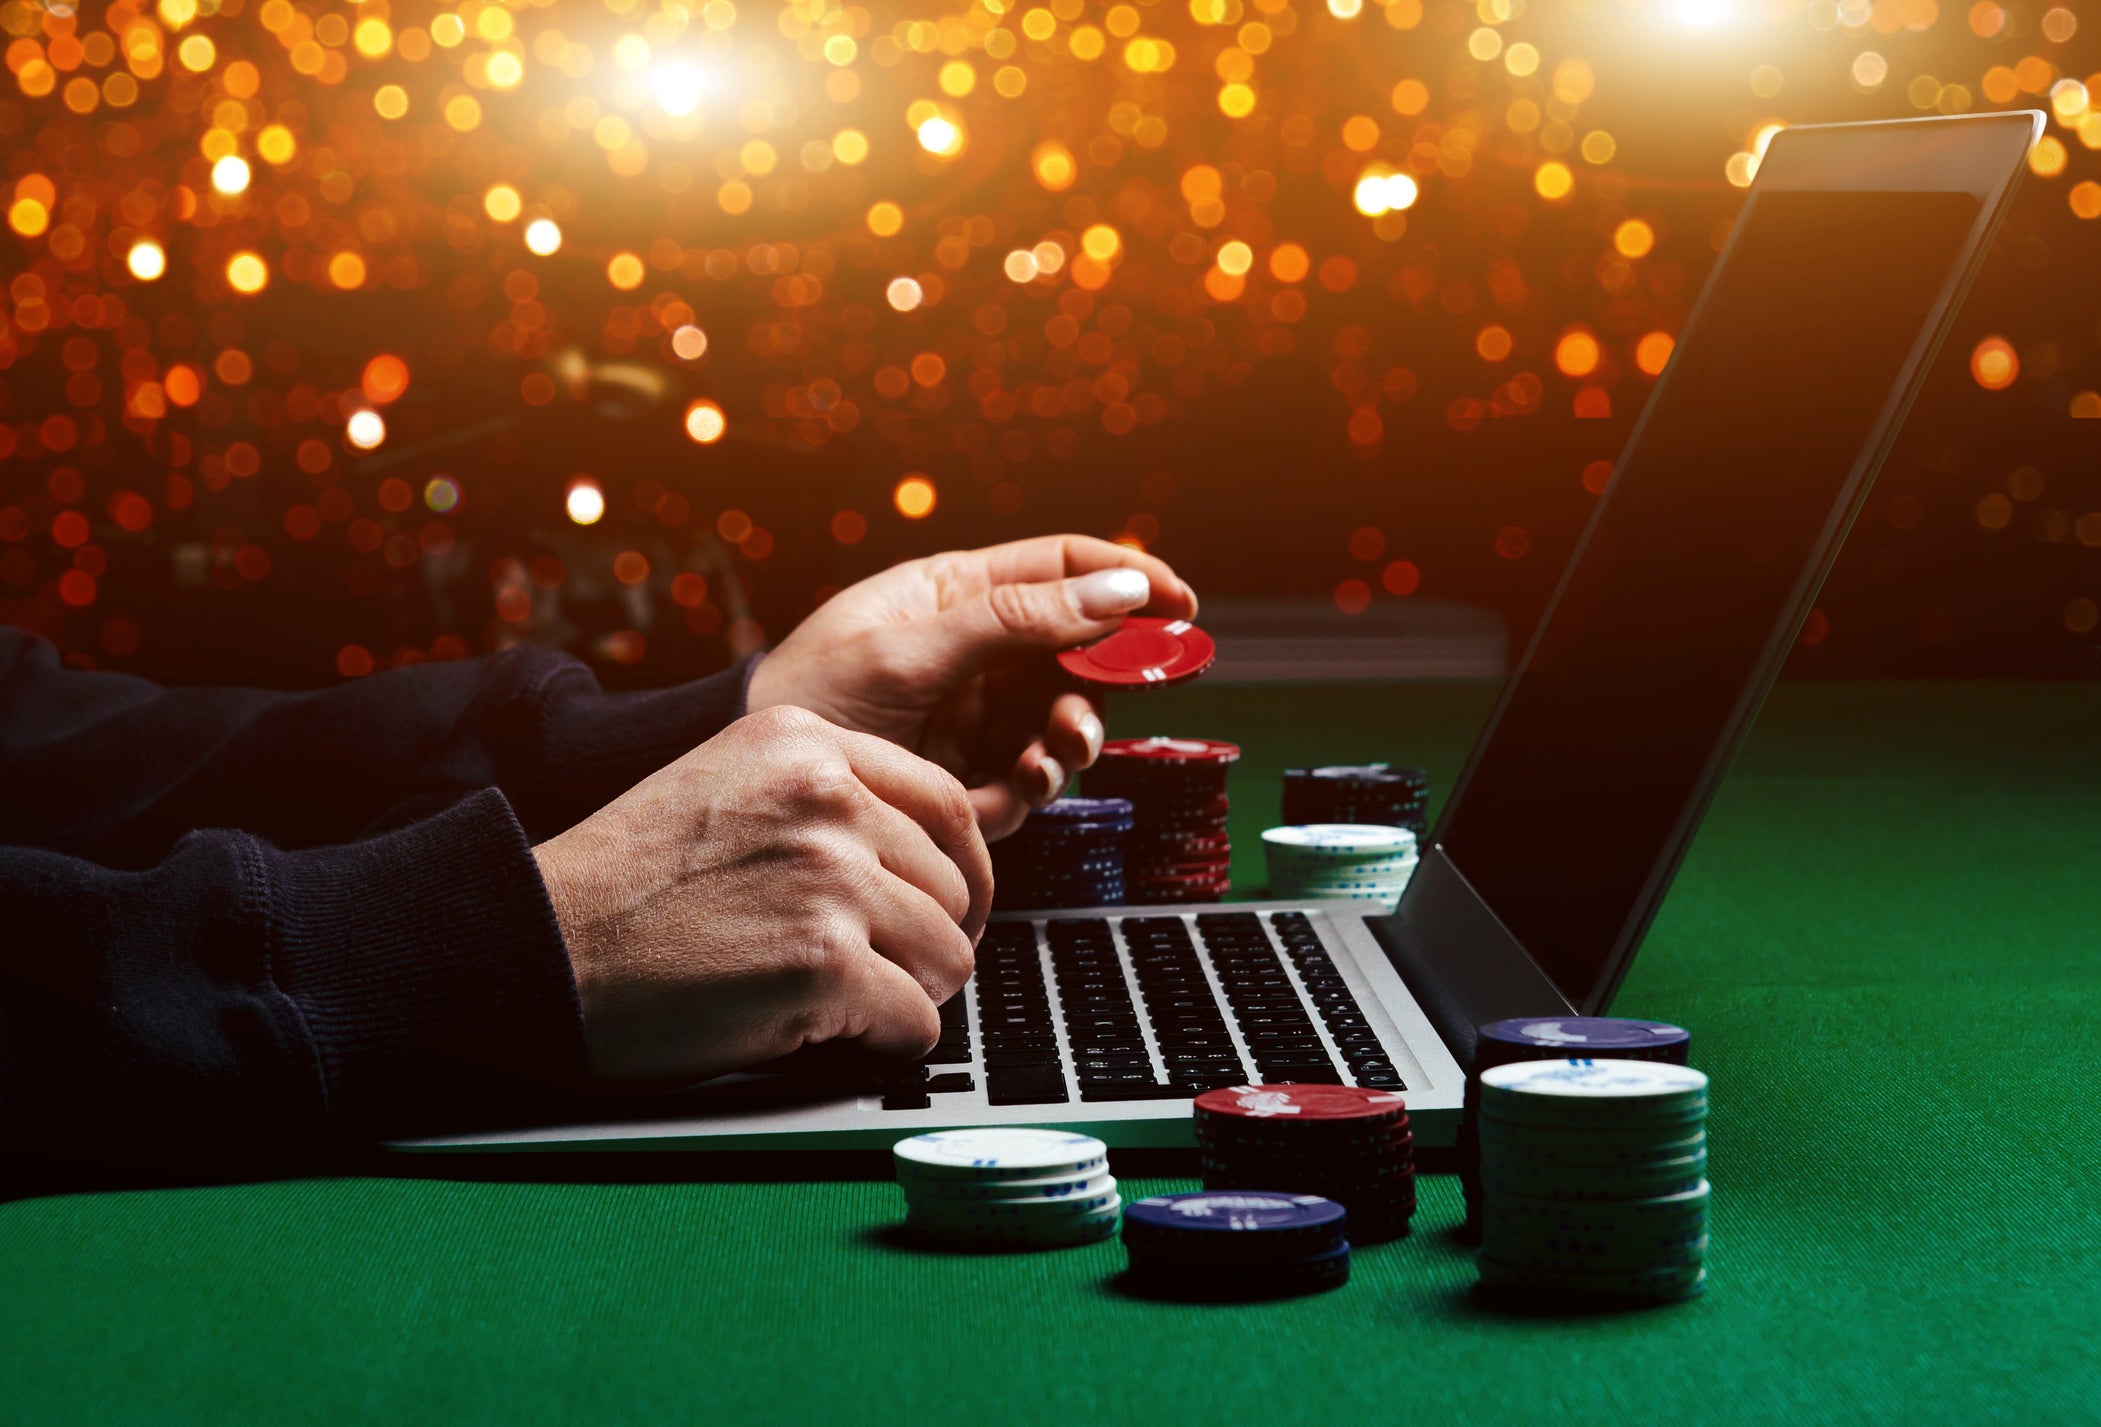 4 Most Competitive Online Gambling Games for Pro Players - Erica O'Brien